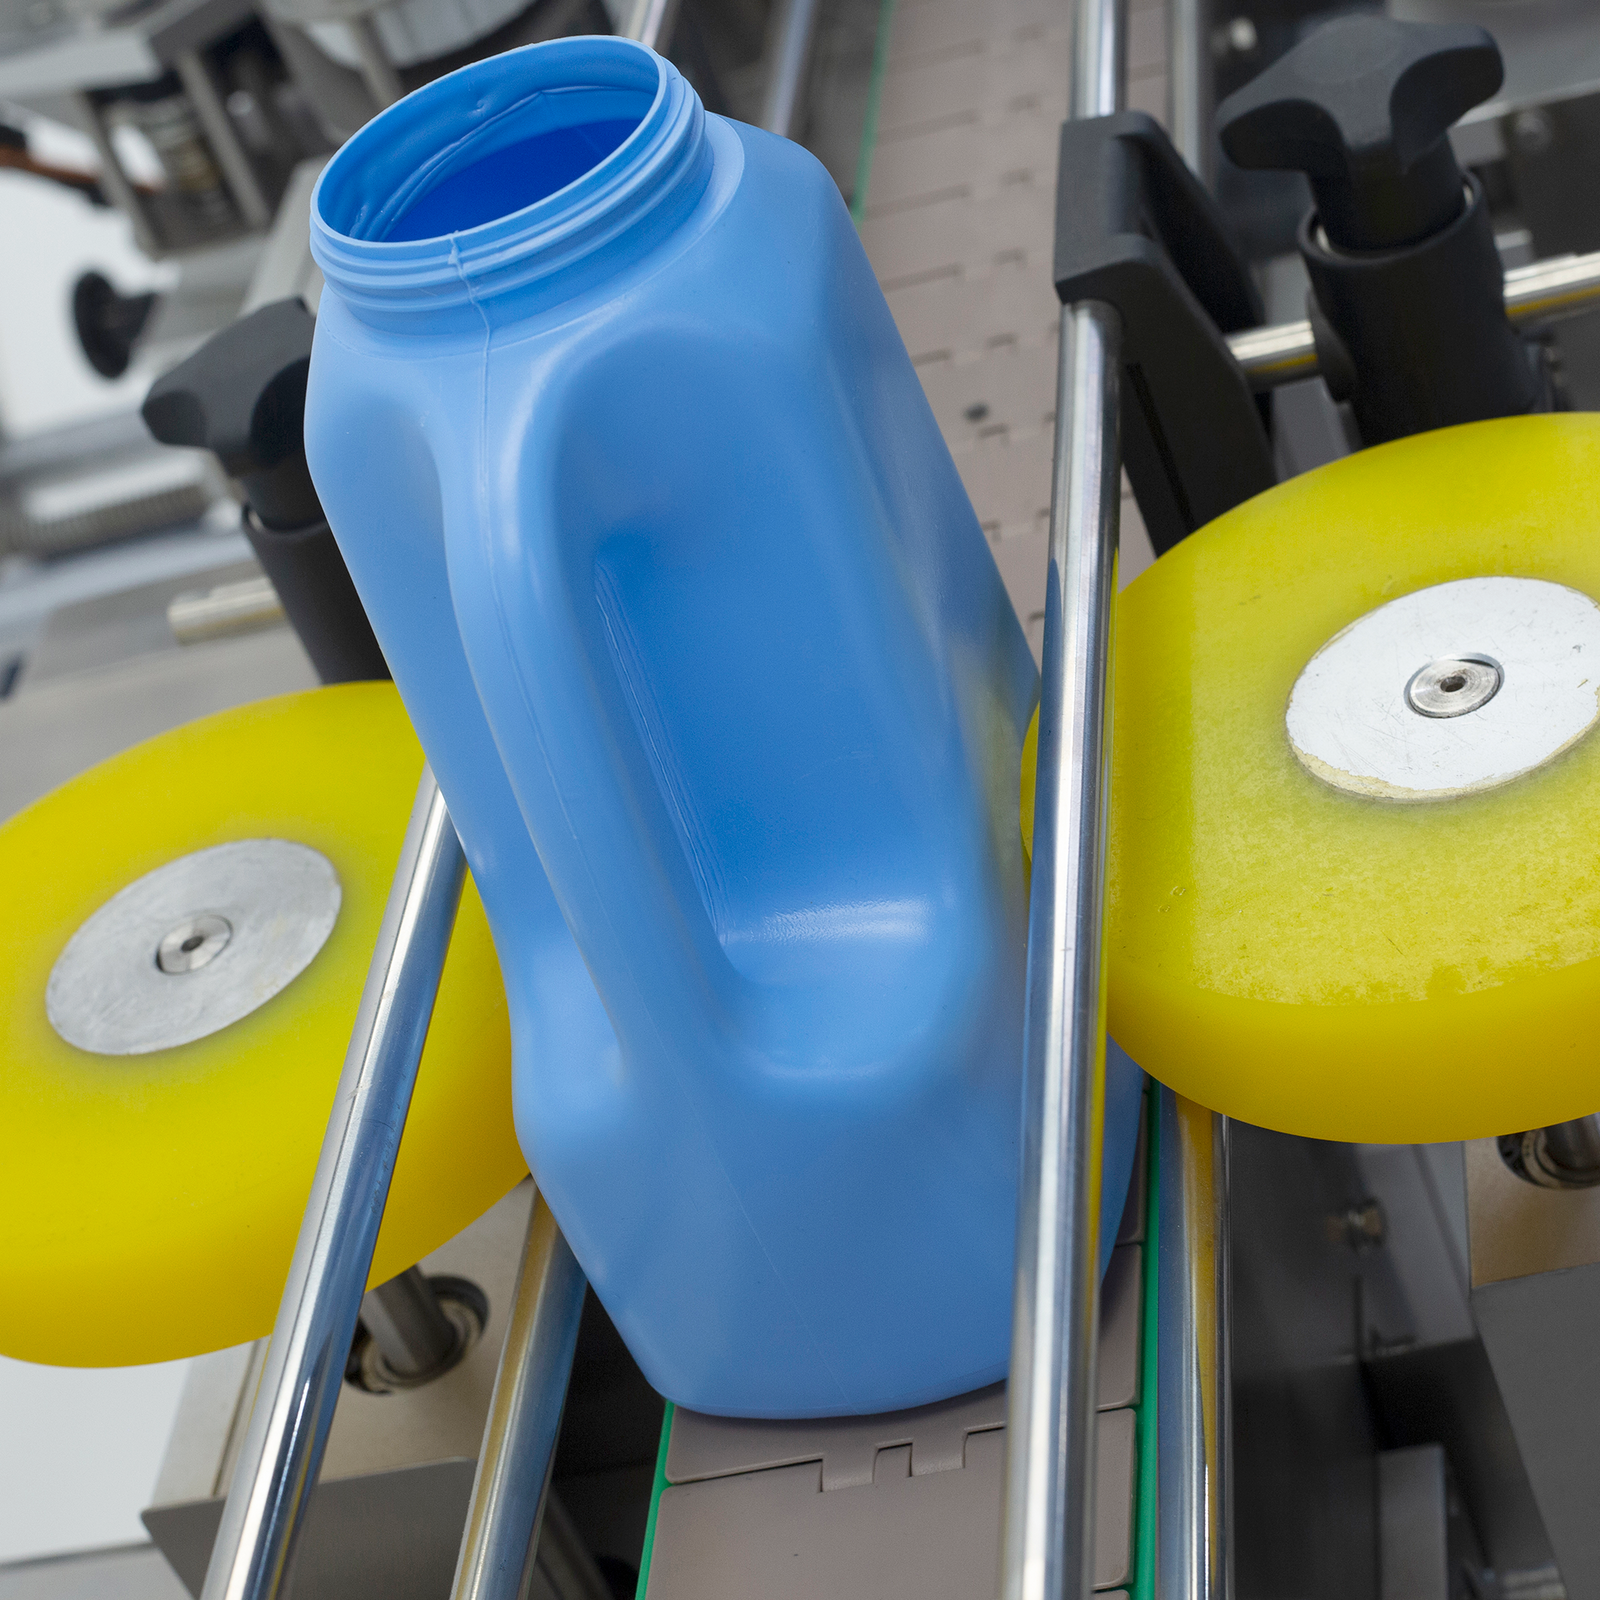 Stainless steel dual automatic label applicator with blue plastic oval containers placed on the conveyor. Machine is placing the stickers on one side of the blue containers.